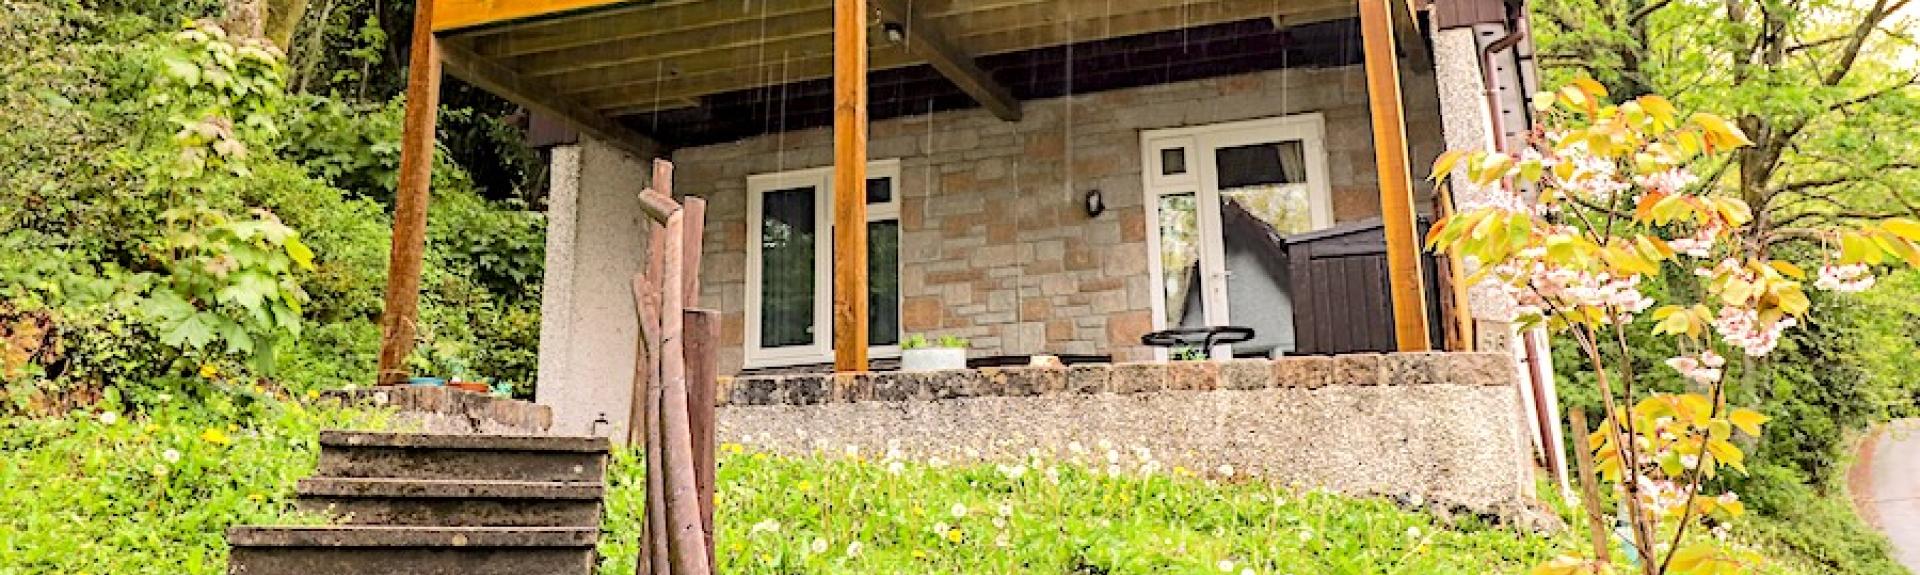 A wood and stone eco lodge with a massive 1st floor balcony enjoys rural views.